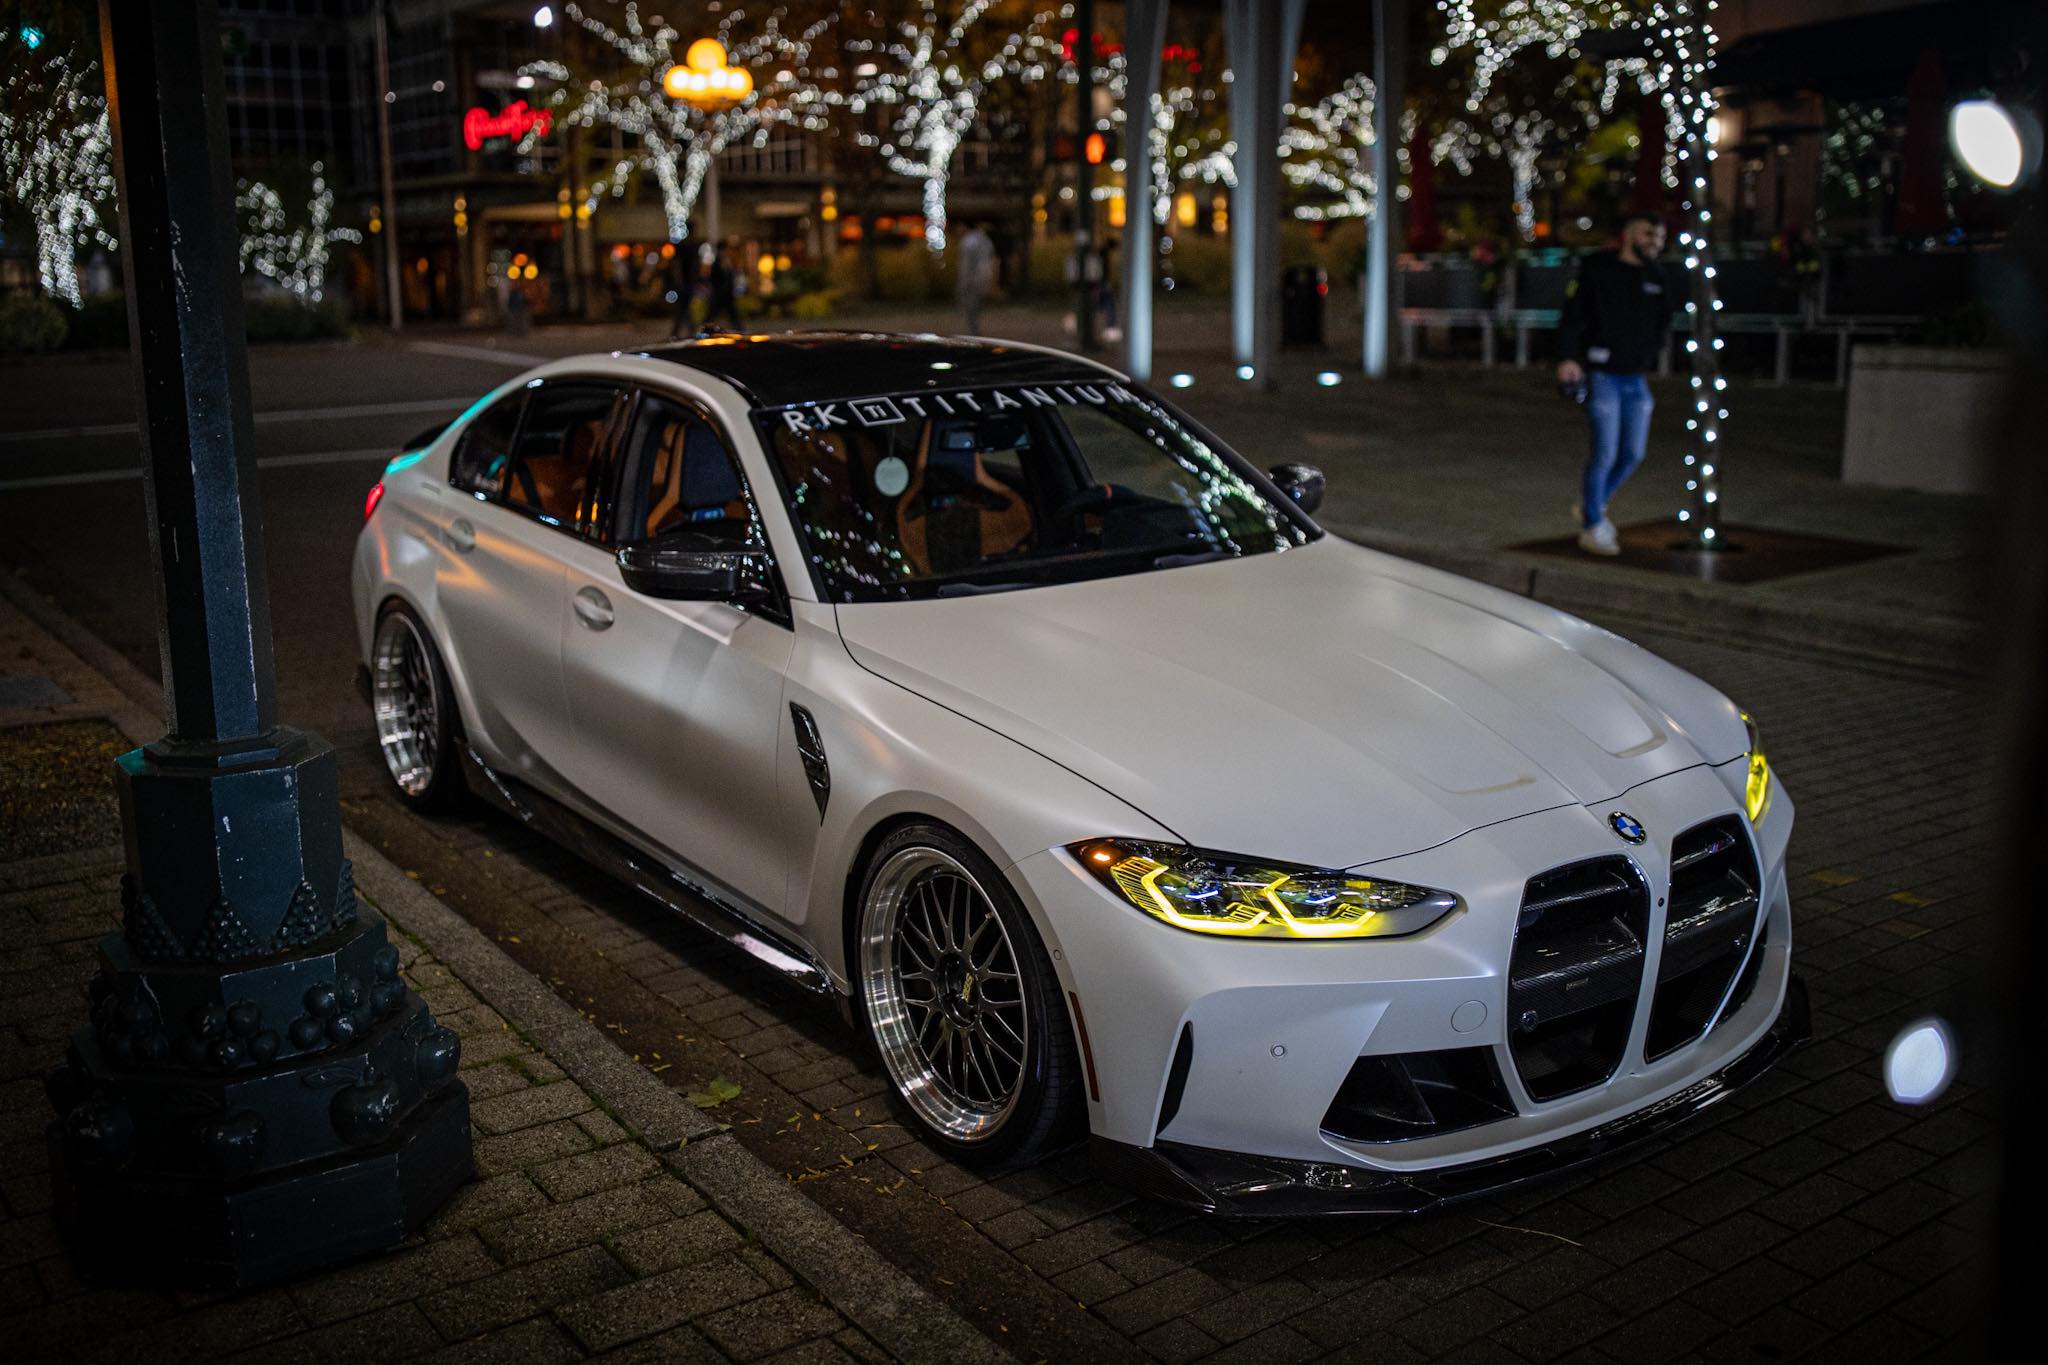 BimmerTrend, Best Online Automotive Store For Your BMW Series